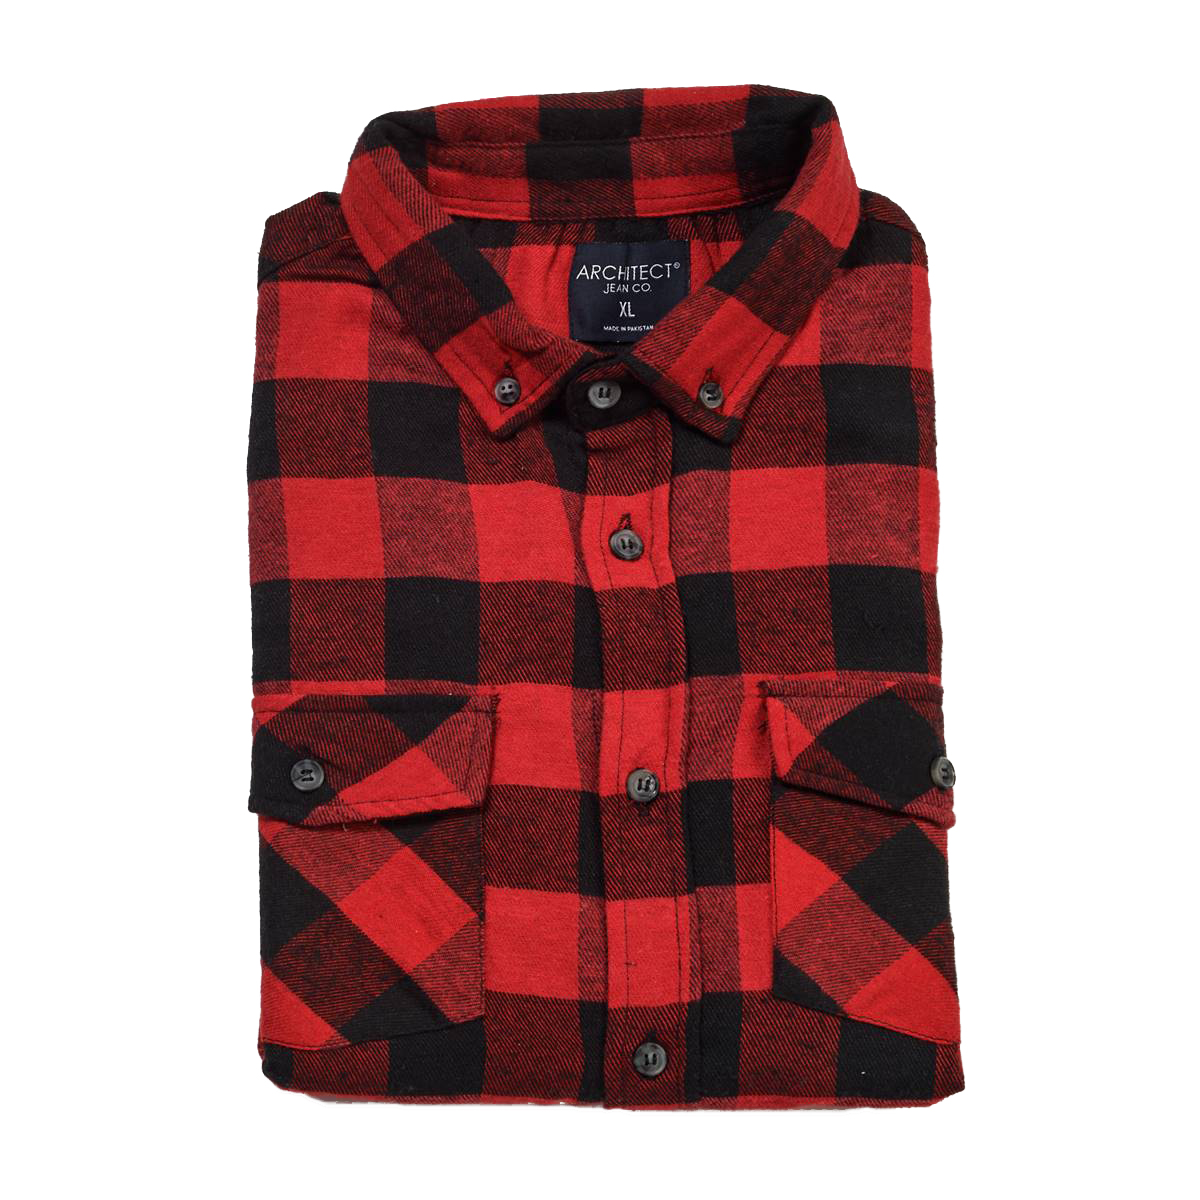 Young Mens Architect(R) Jean Co. Flannel Shirt - Red/Black